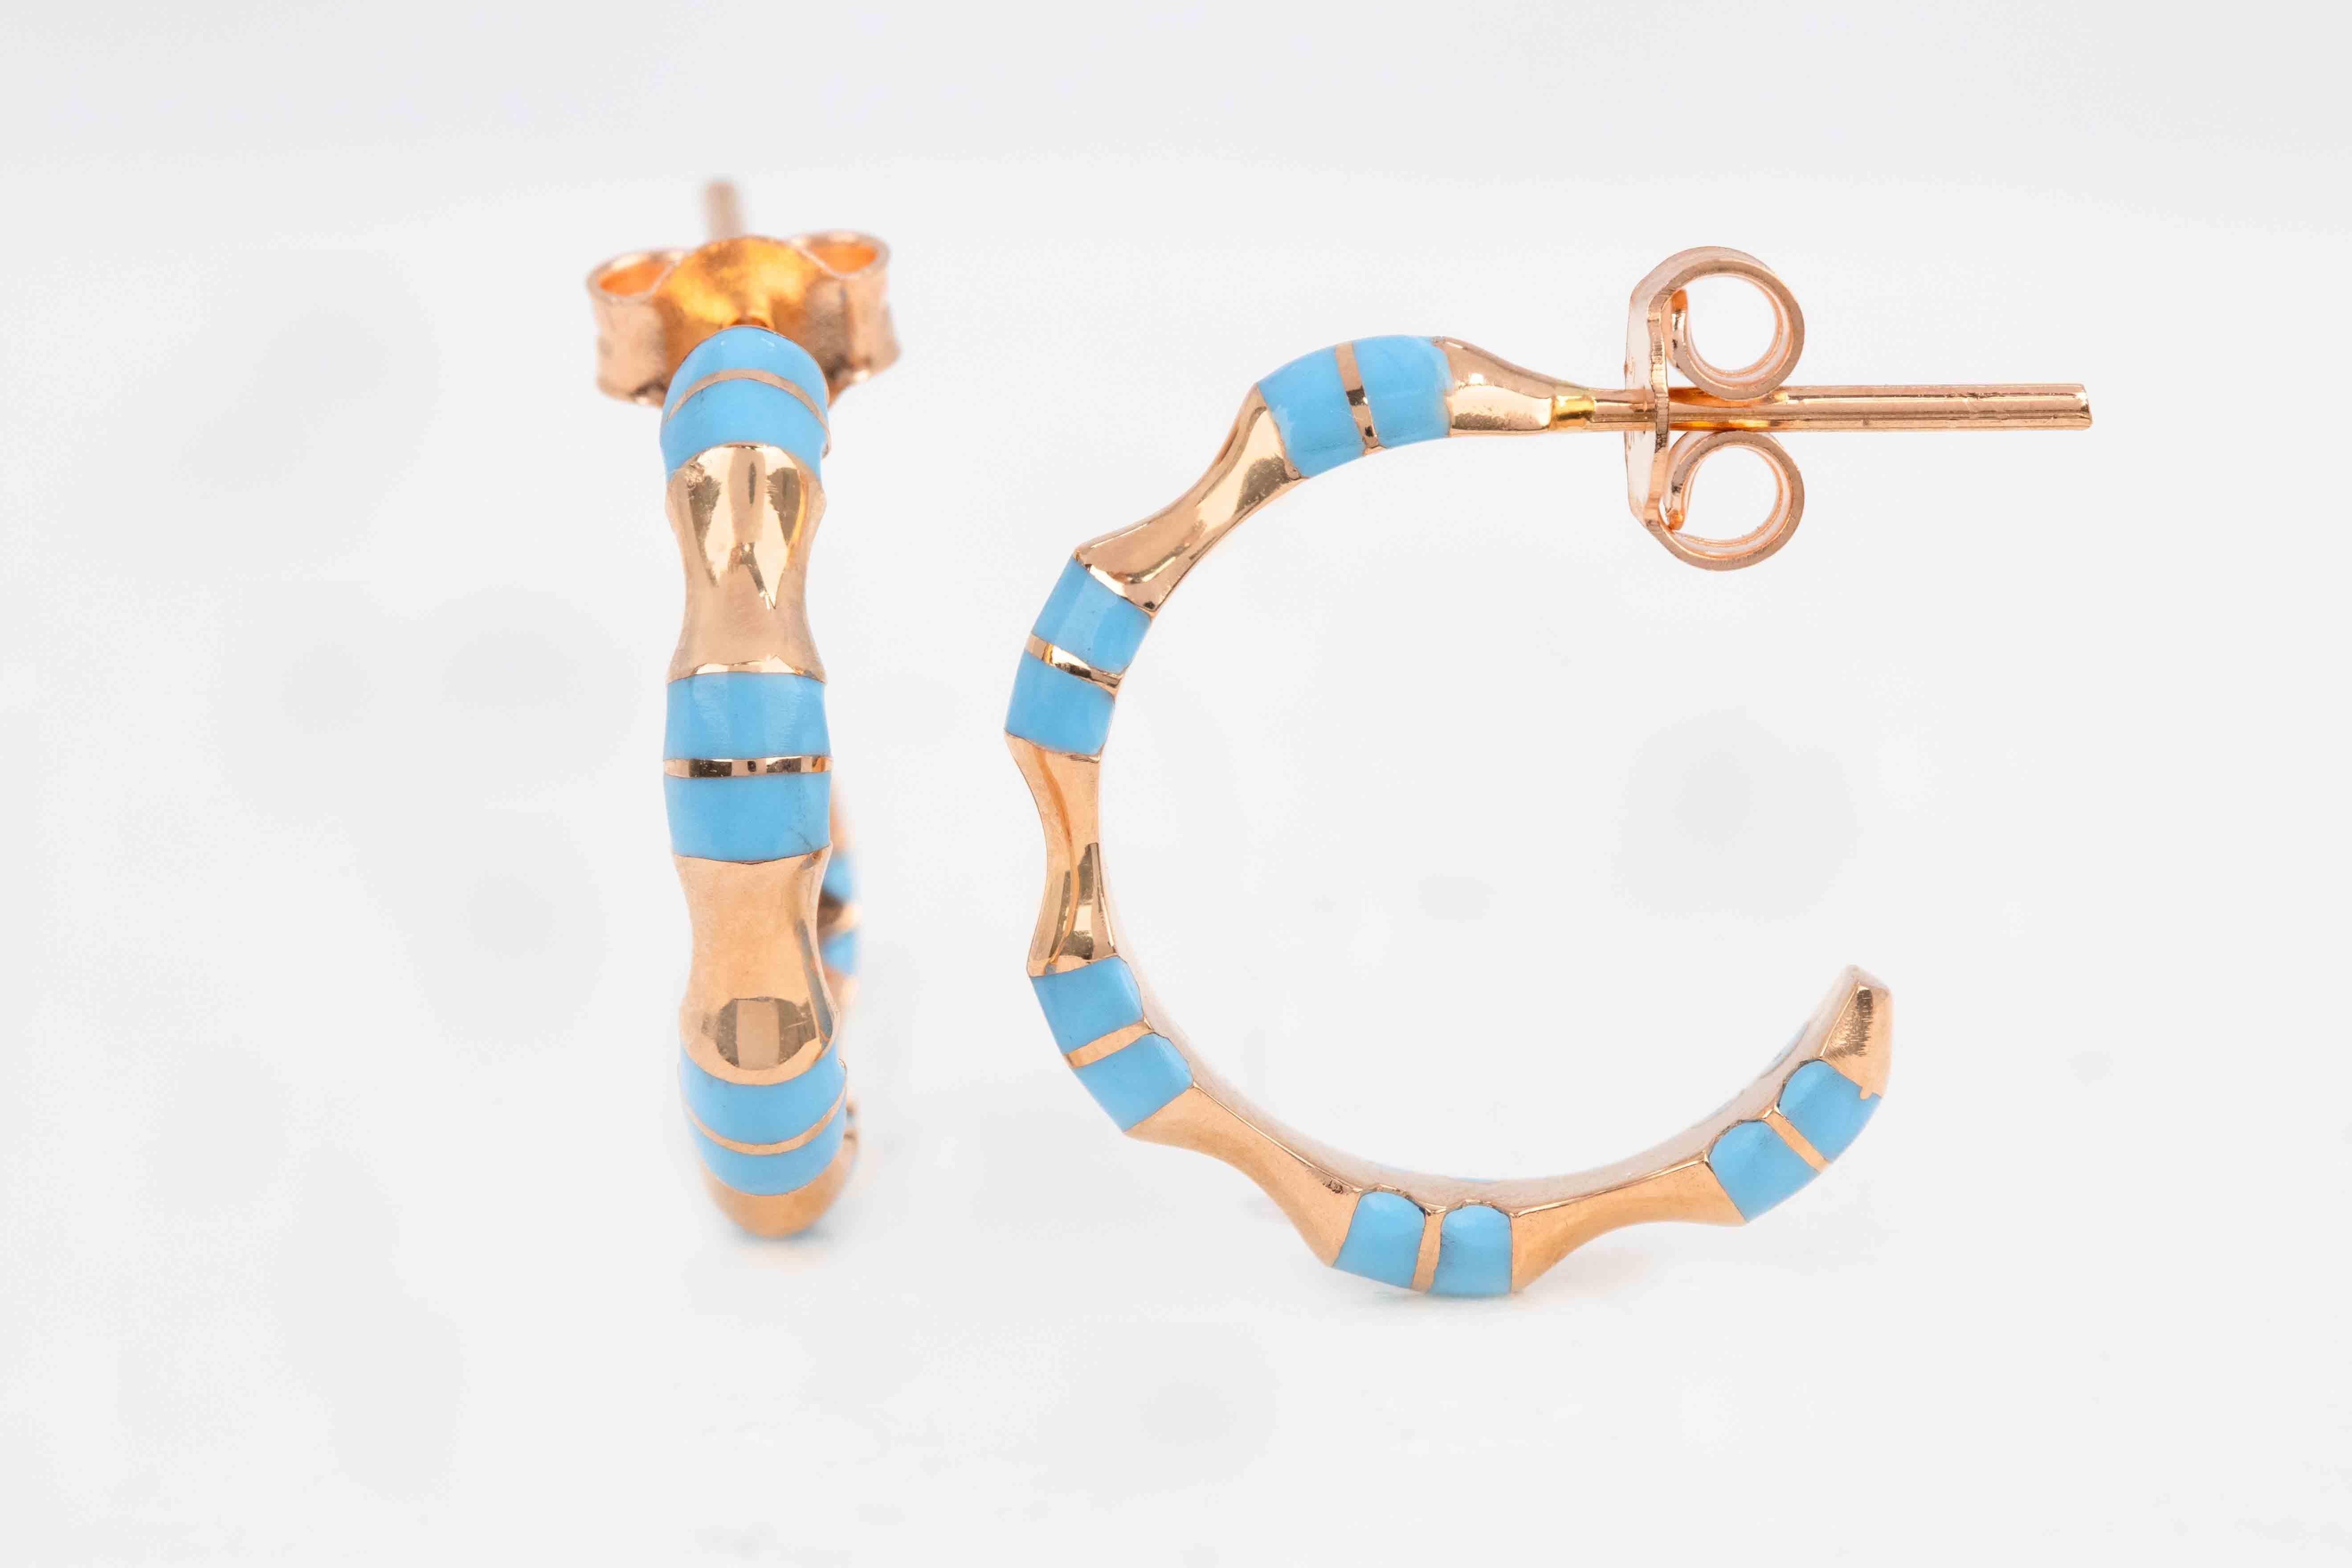 14K Gold Enamel Hoop Earrings, Solid Gold C Shaped Earrings,Rose Gold and Turquoise Enameled Half Hoop Hoop Earrings

This earrings was made with quality materials and excellent handwork. I guarantee the quality assurance of my handwork and